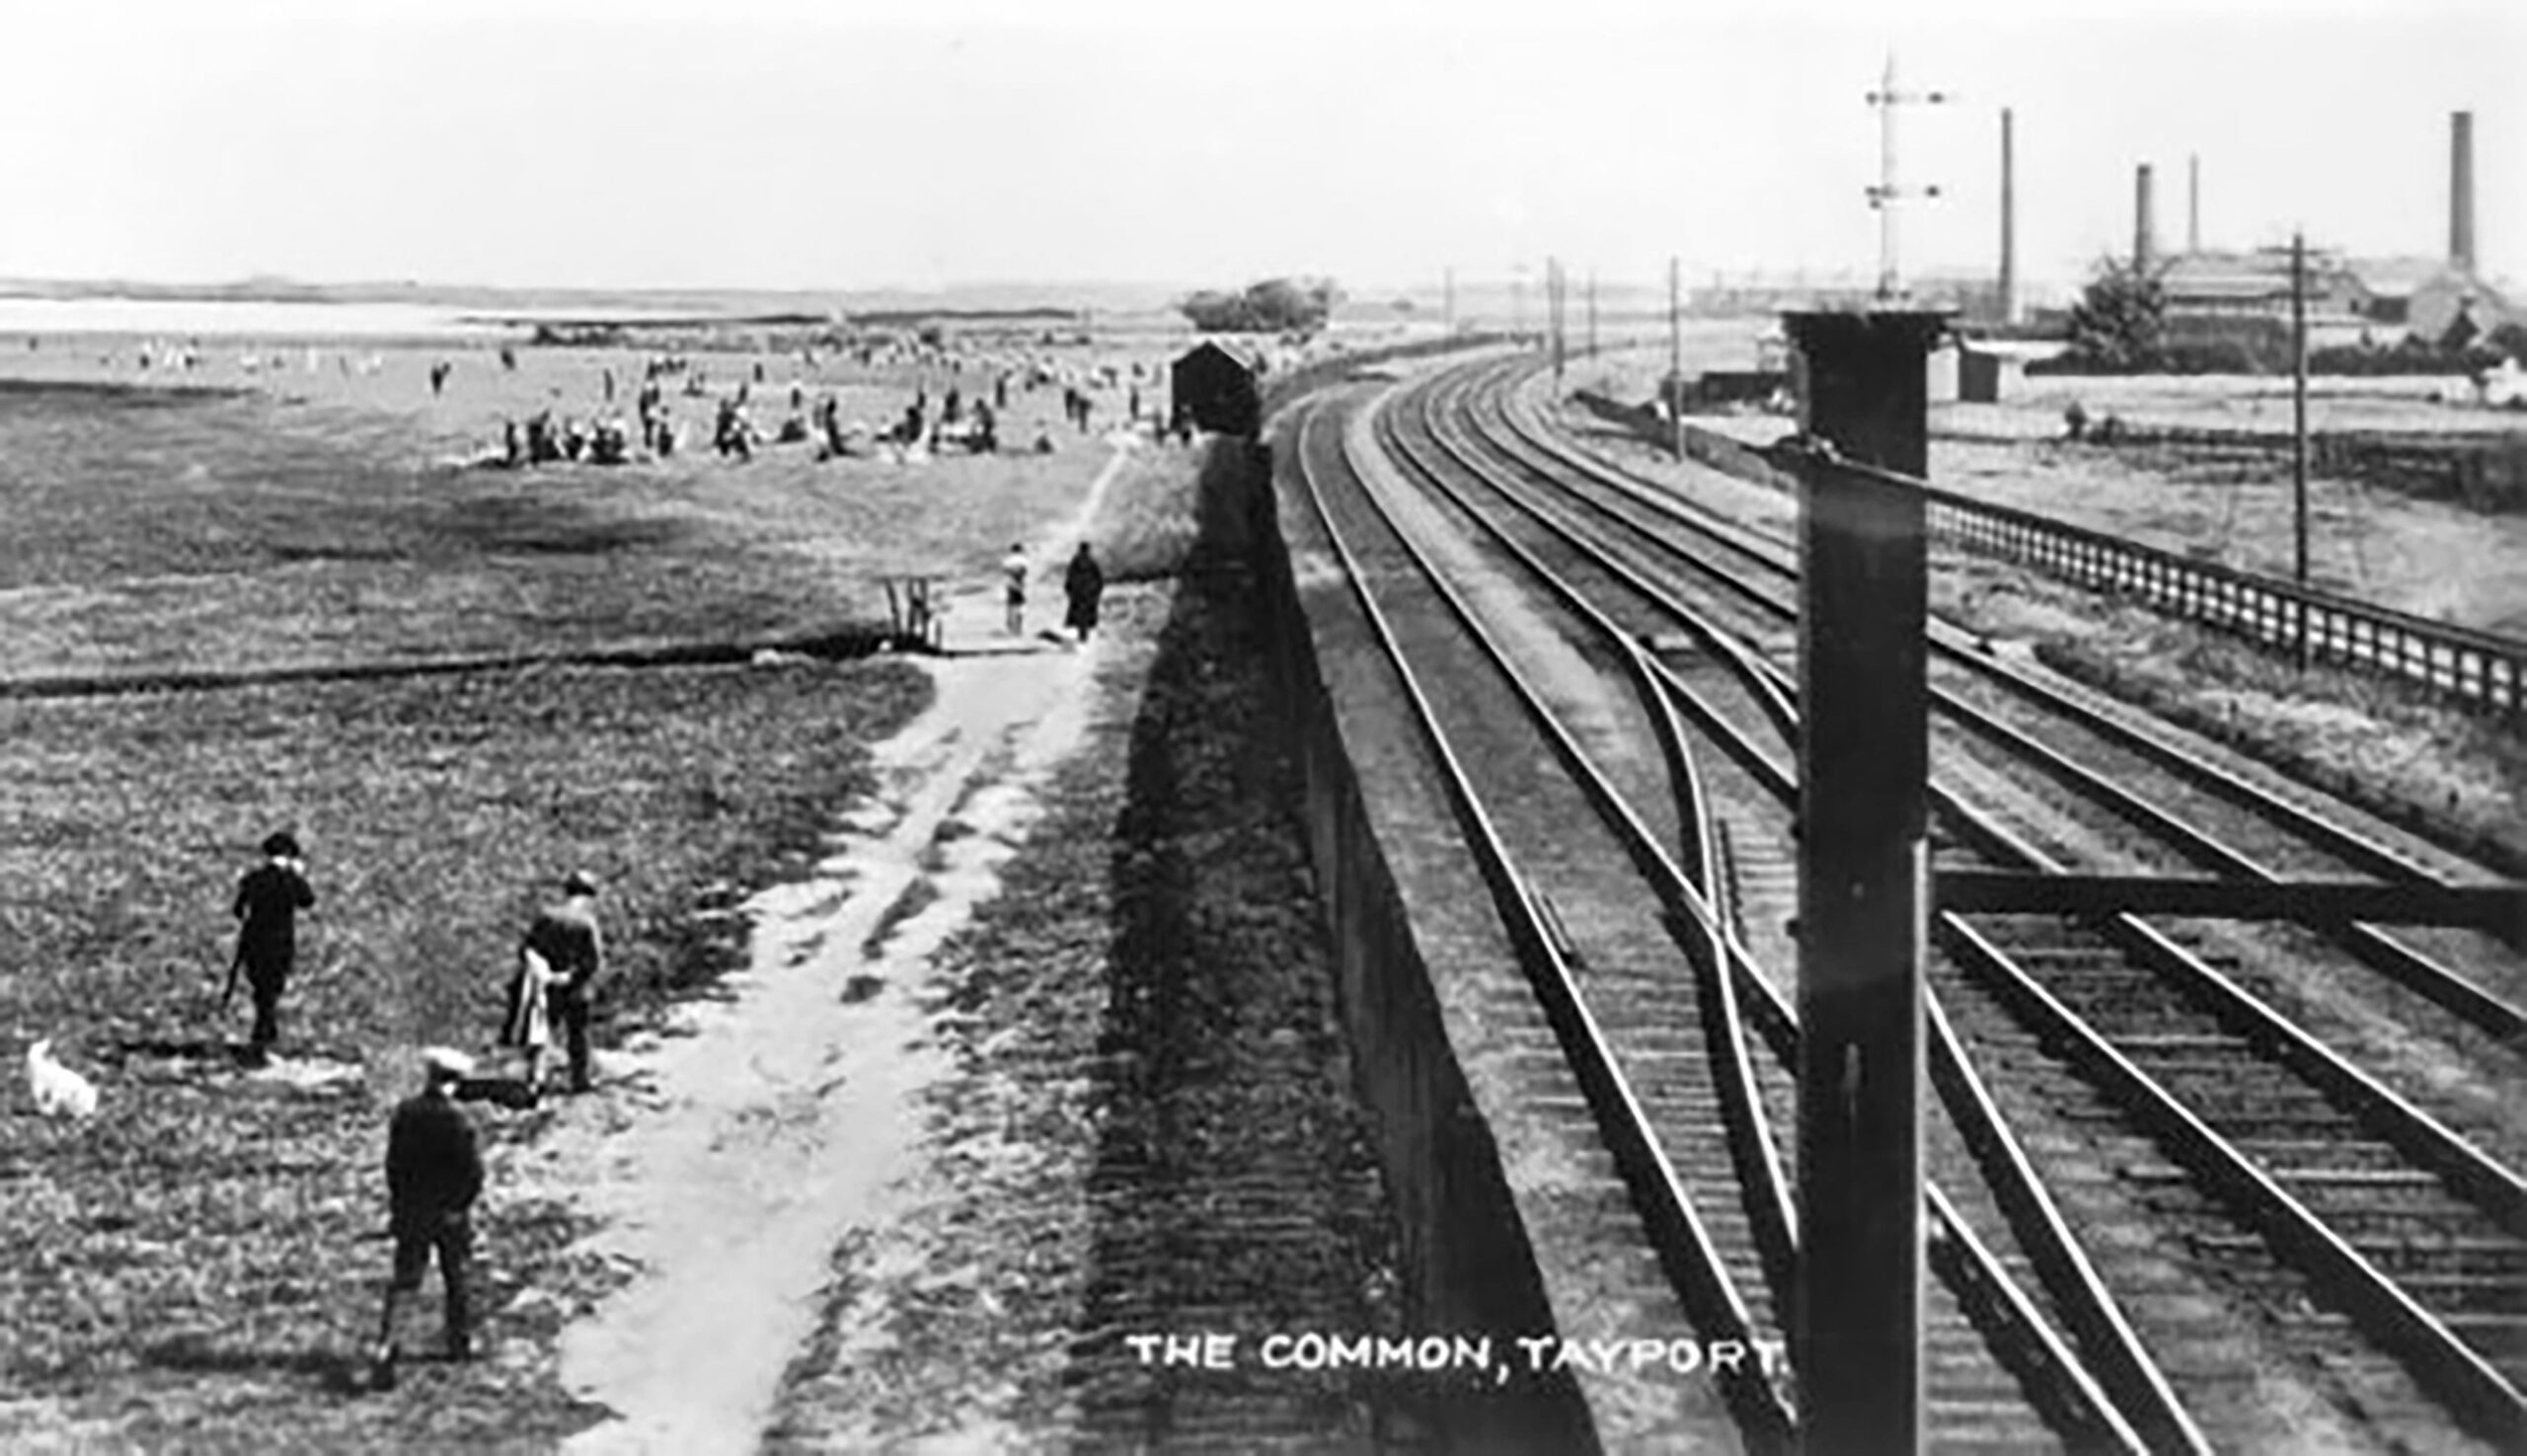 Tayport Heritage Trail - Board 20 - View from footbridge at Tayport South signal box looking towards East Common with Edinburgh rail track leading past the industrial area